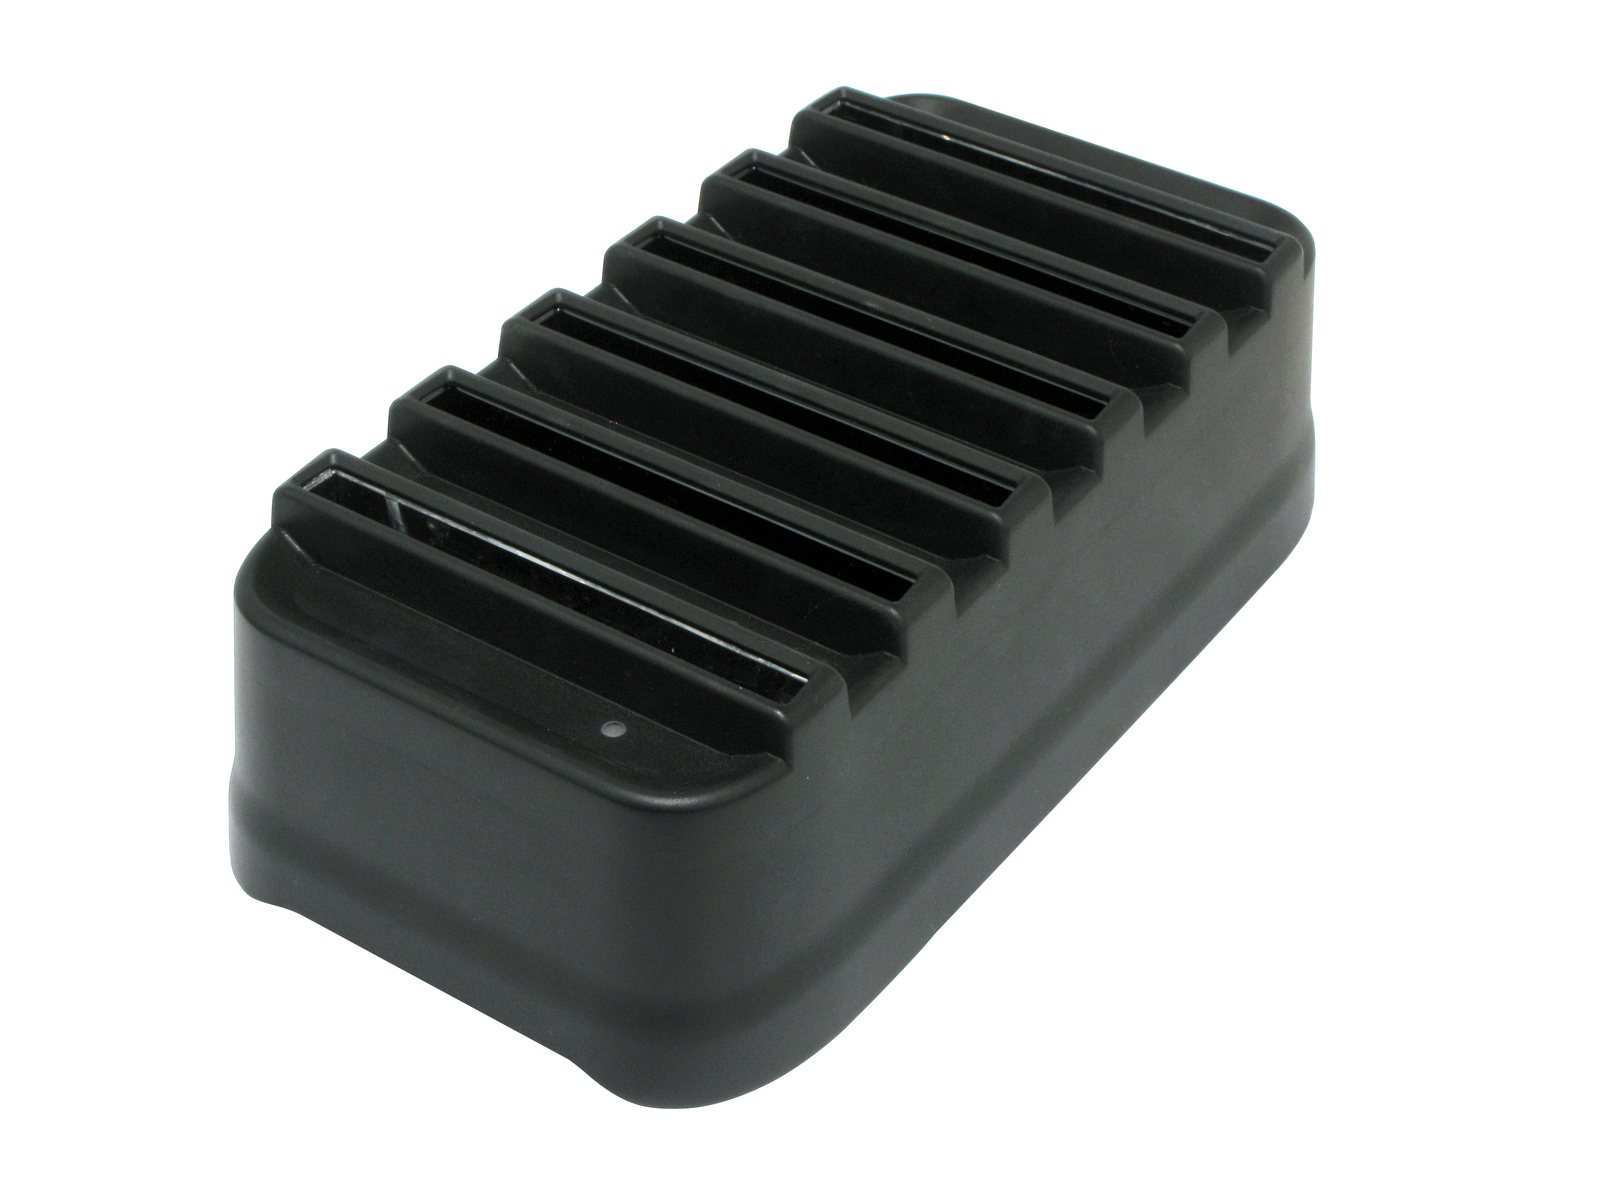 6-Bay battery pack charger